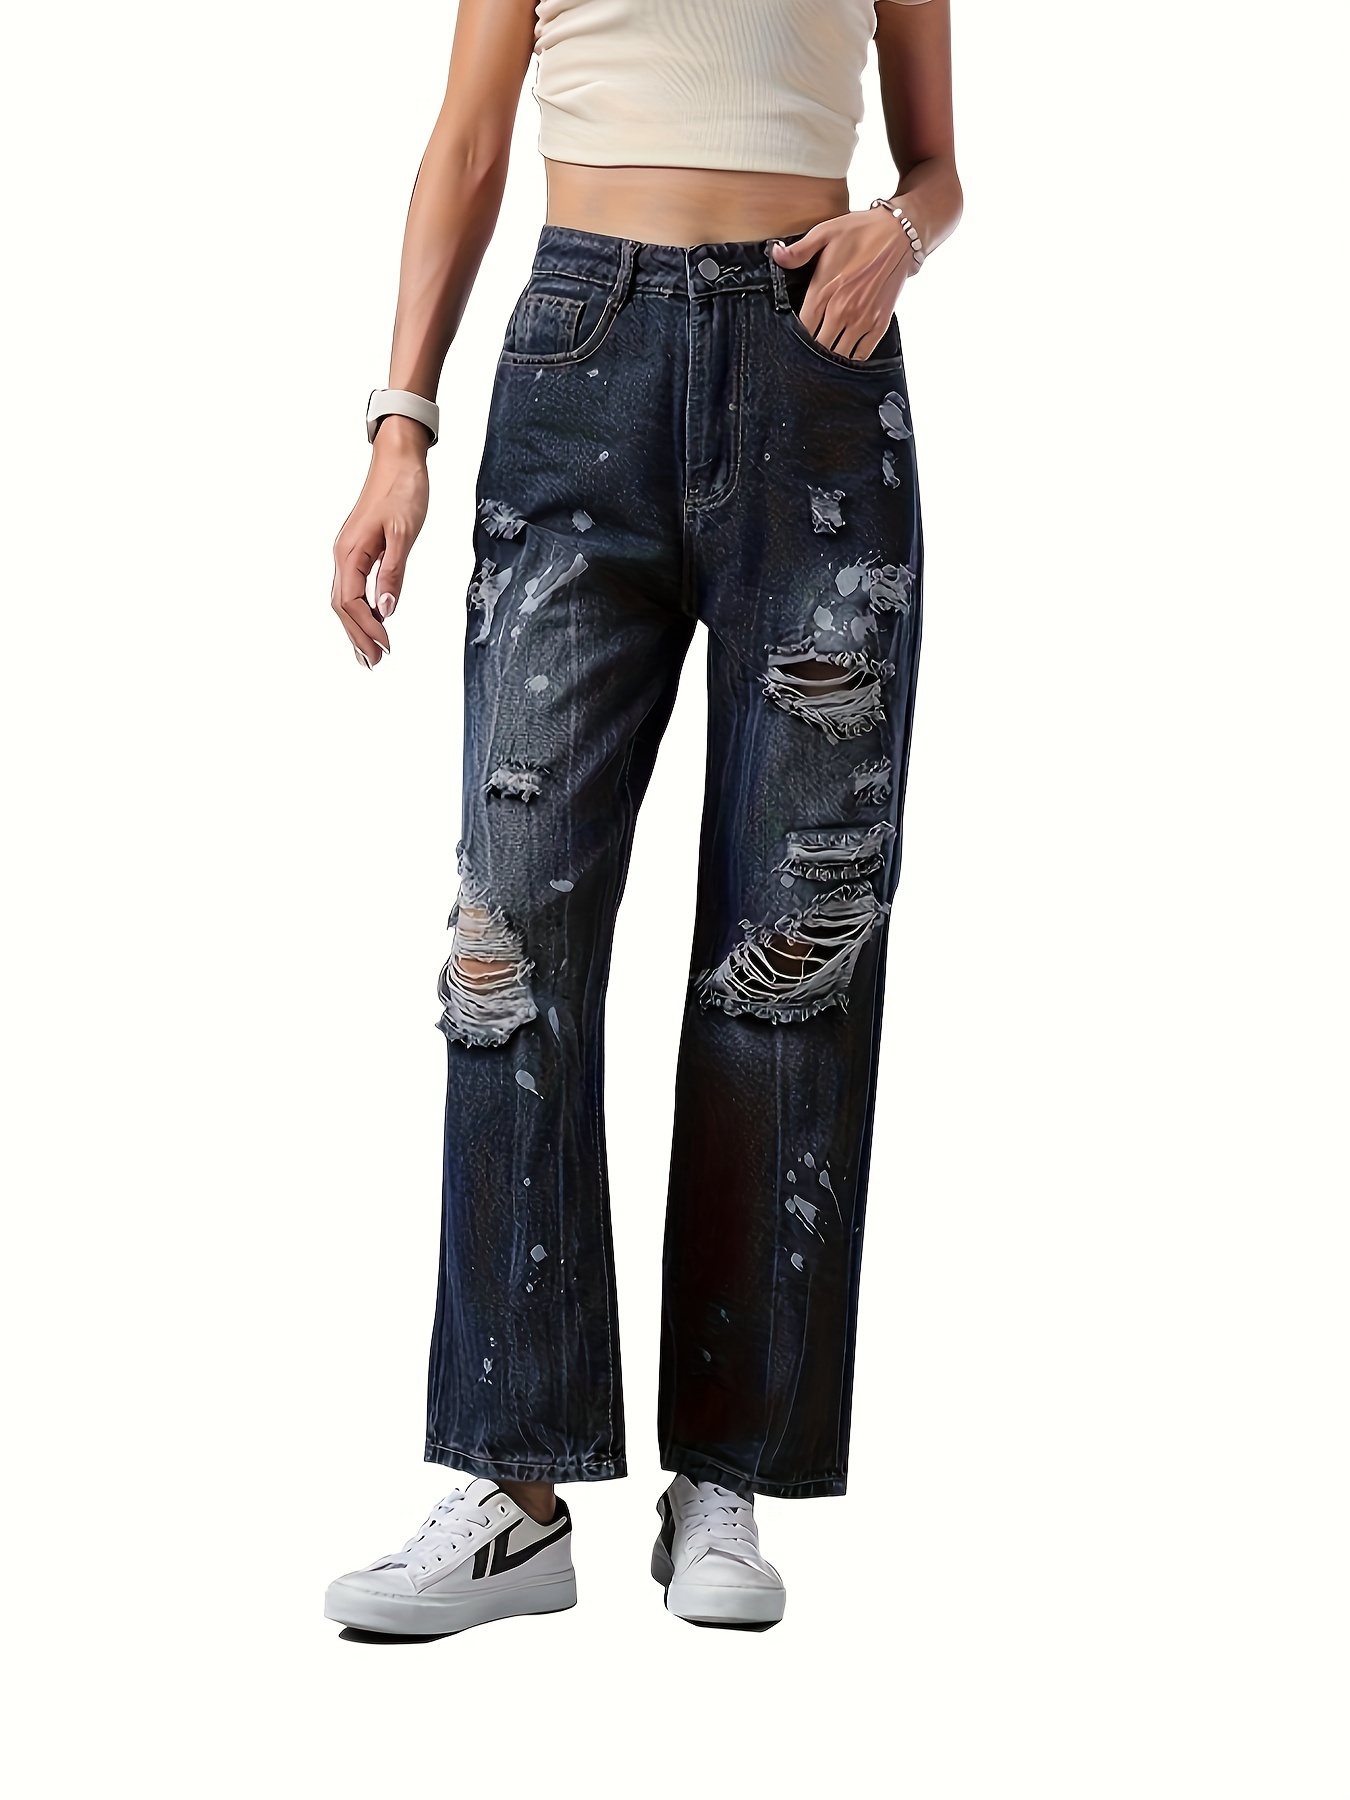 Grey Ripped Holes Straight Jeans, Non-Stretch Distressed Loose Fit Street  Style Denim Pants, Women's Denim Jeans & Clothing